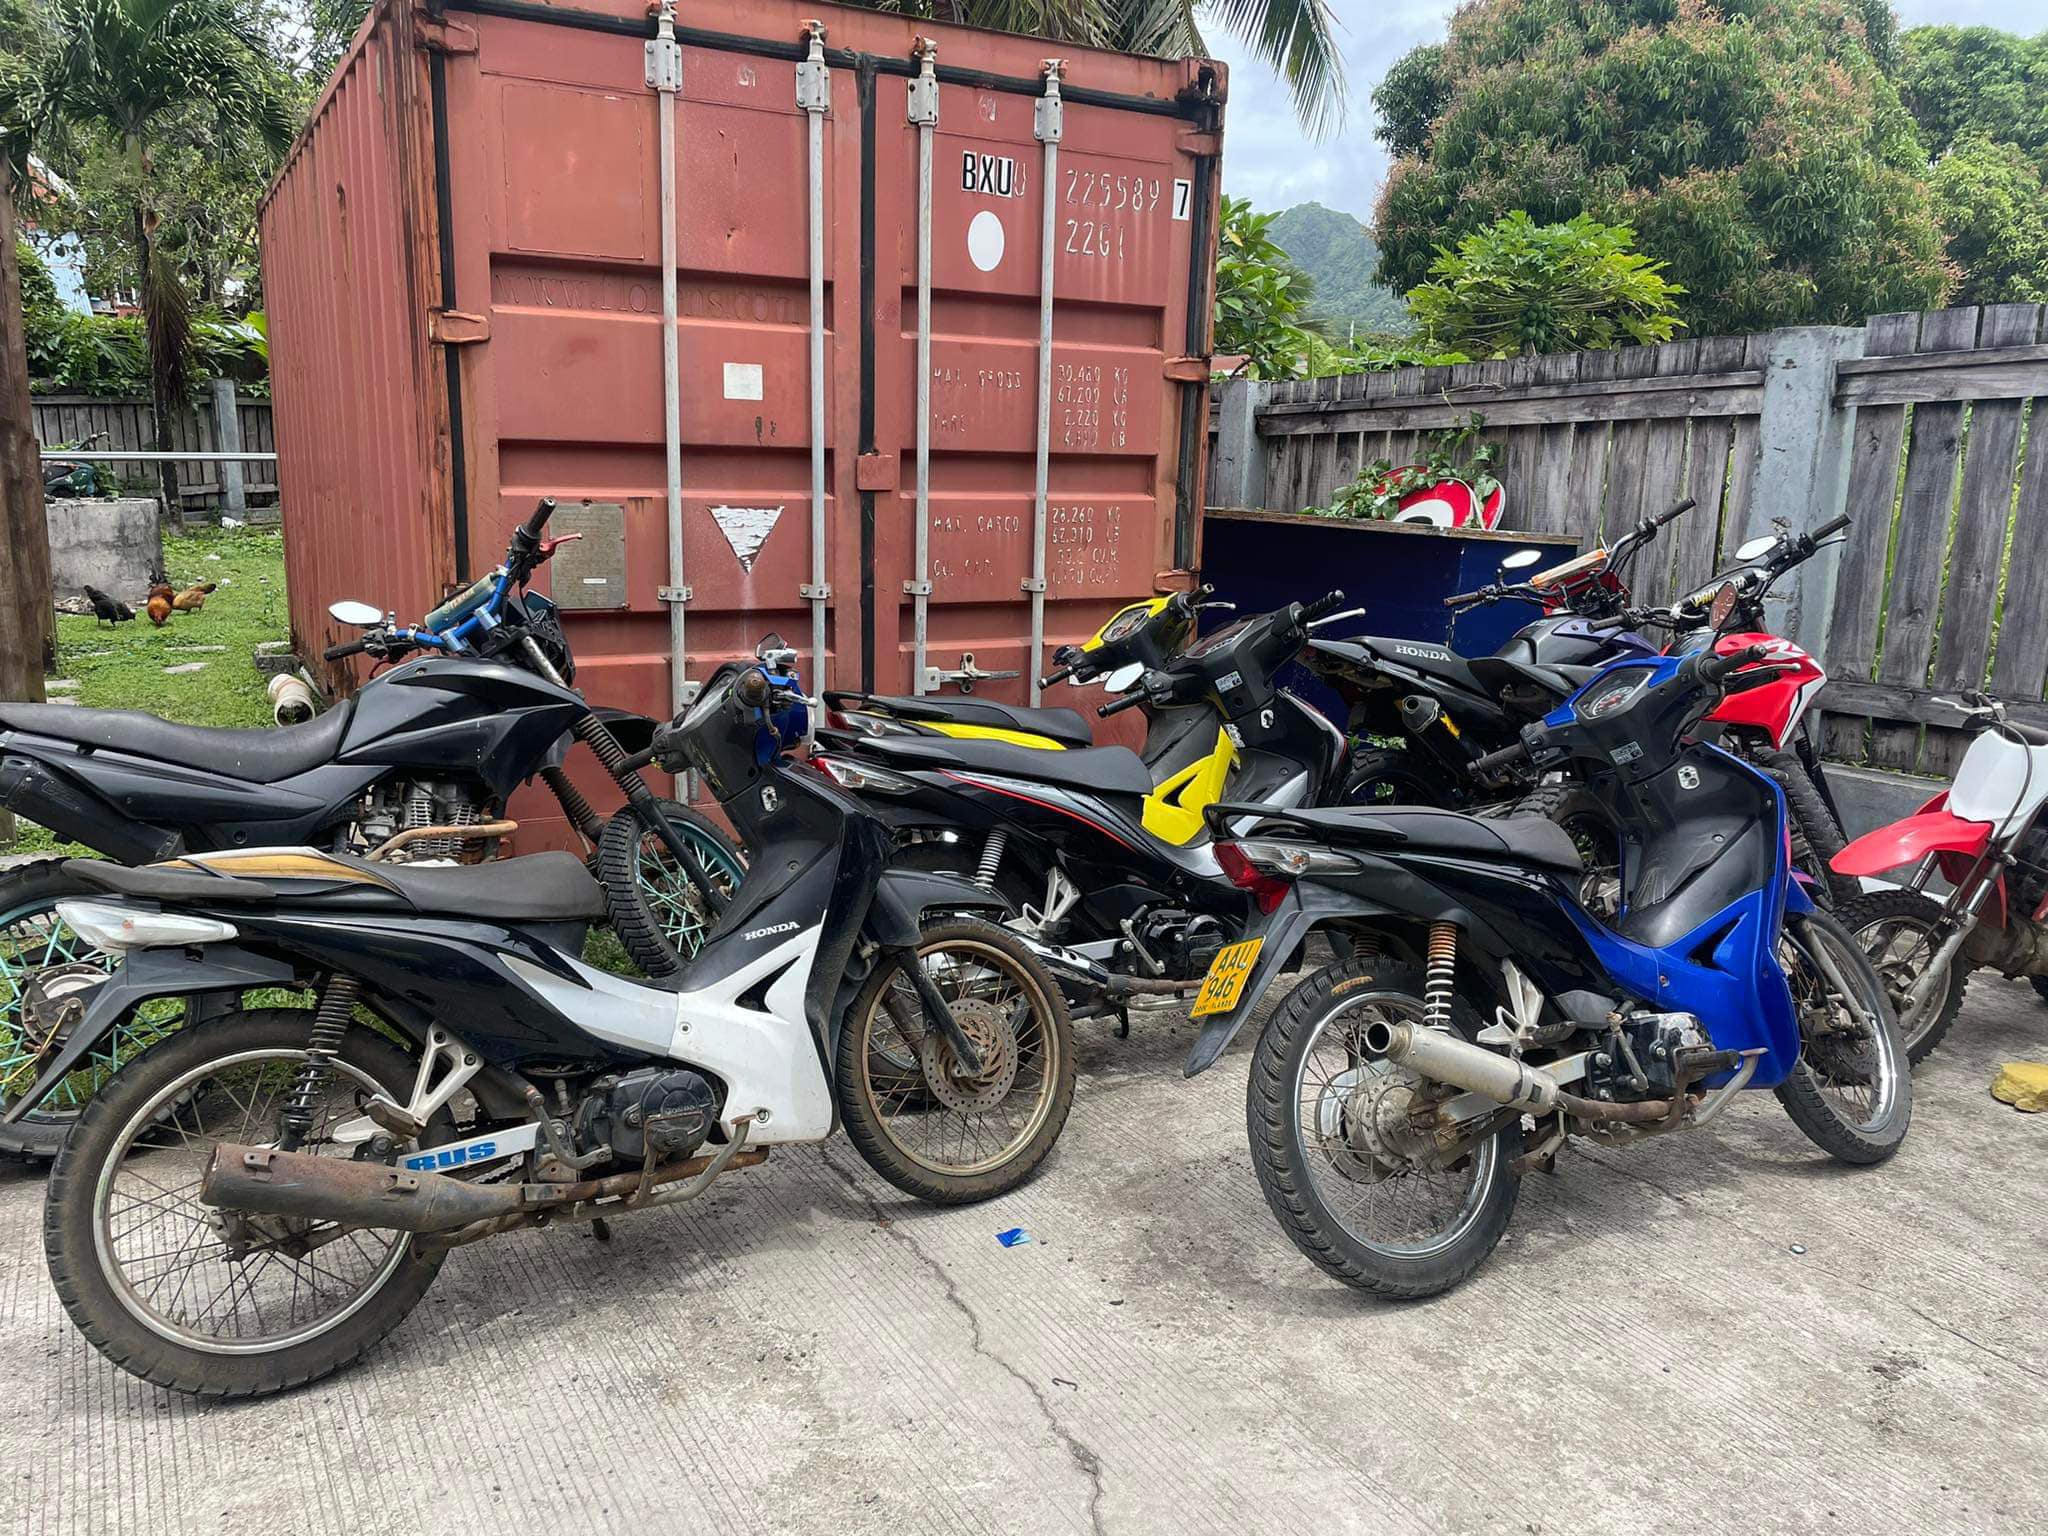 Four motorbikes stolen, only one recovered in pieces